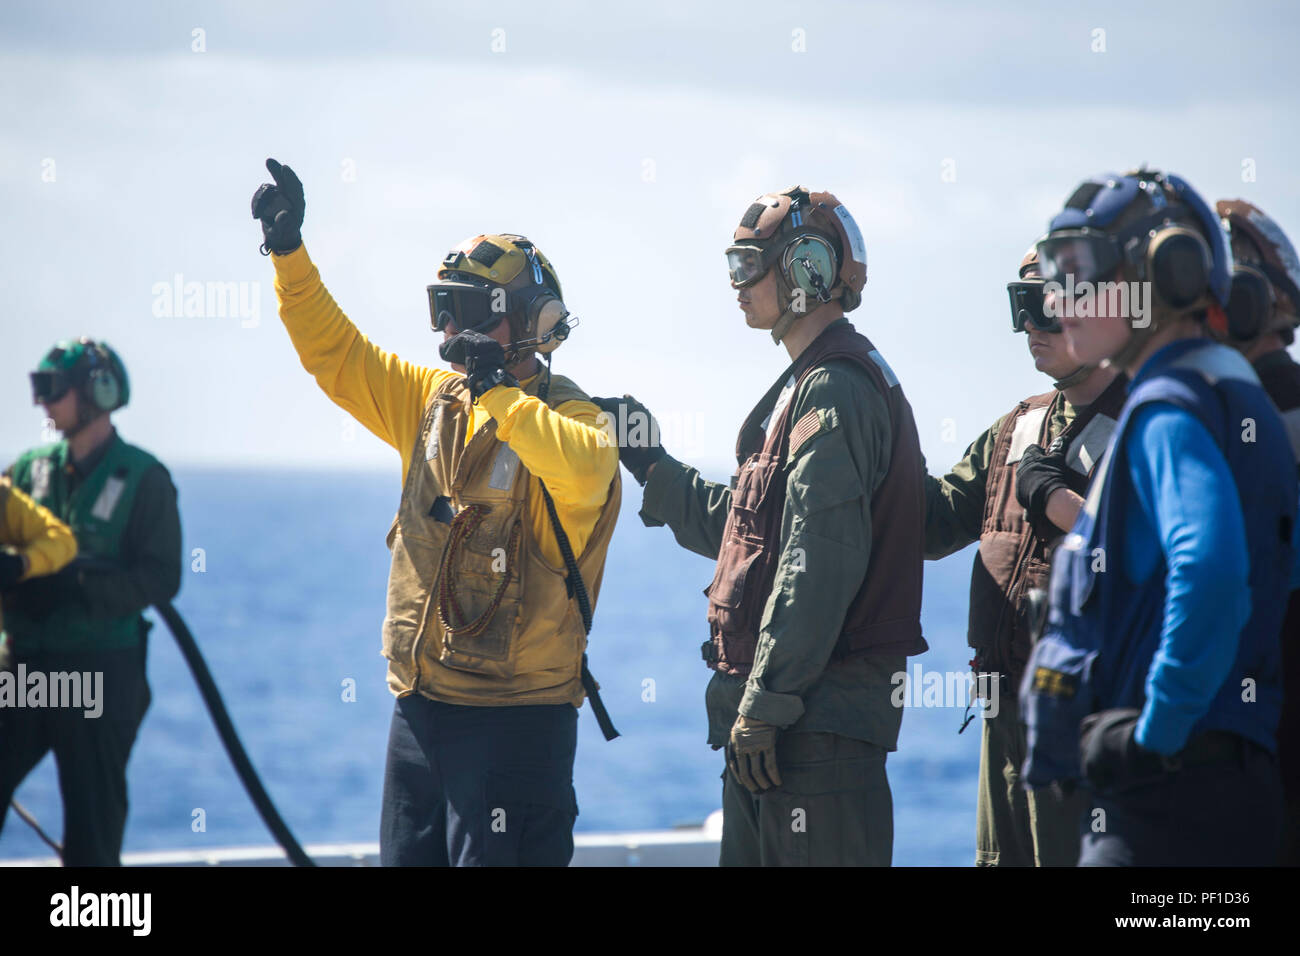 U.S. Marines and Sailors with the Boxer Amphibious Ready Group and 13th Marine Expeditionary Unit conduct aircraft fire hazard drills aboard the USS Boxer, Feb. 24, 2016. More than 4,500 Sailors and Marines from the Boxer ARG, 13th MEU team are currently transiting the Pacific Ocean toward the U.S. 7th Fleet area of operations during a scheduled deployment. (U.S. Marine Corps photo by Sgt. Briauna Birl/RELEASED) Stock Photo